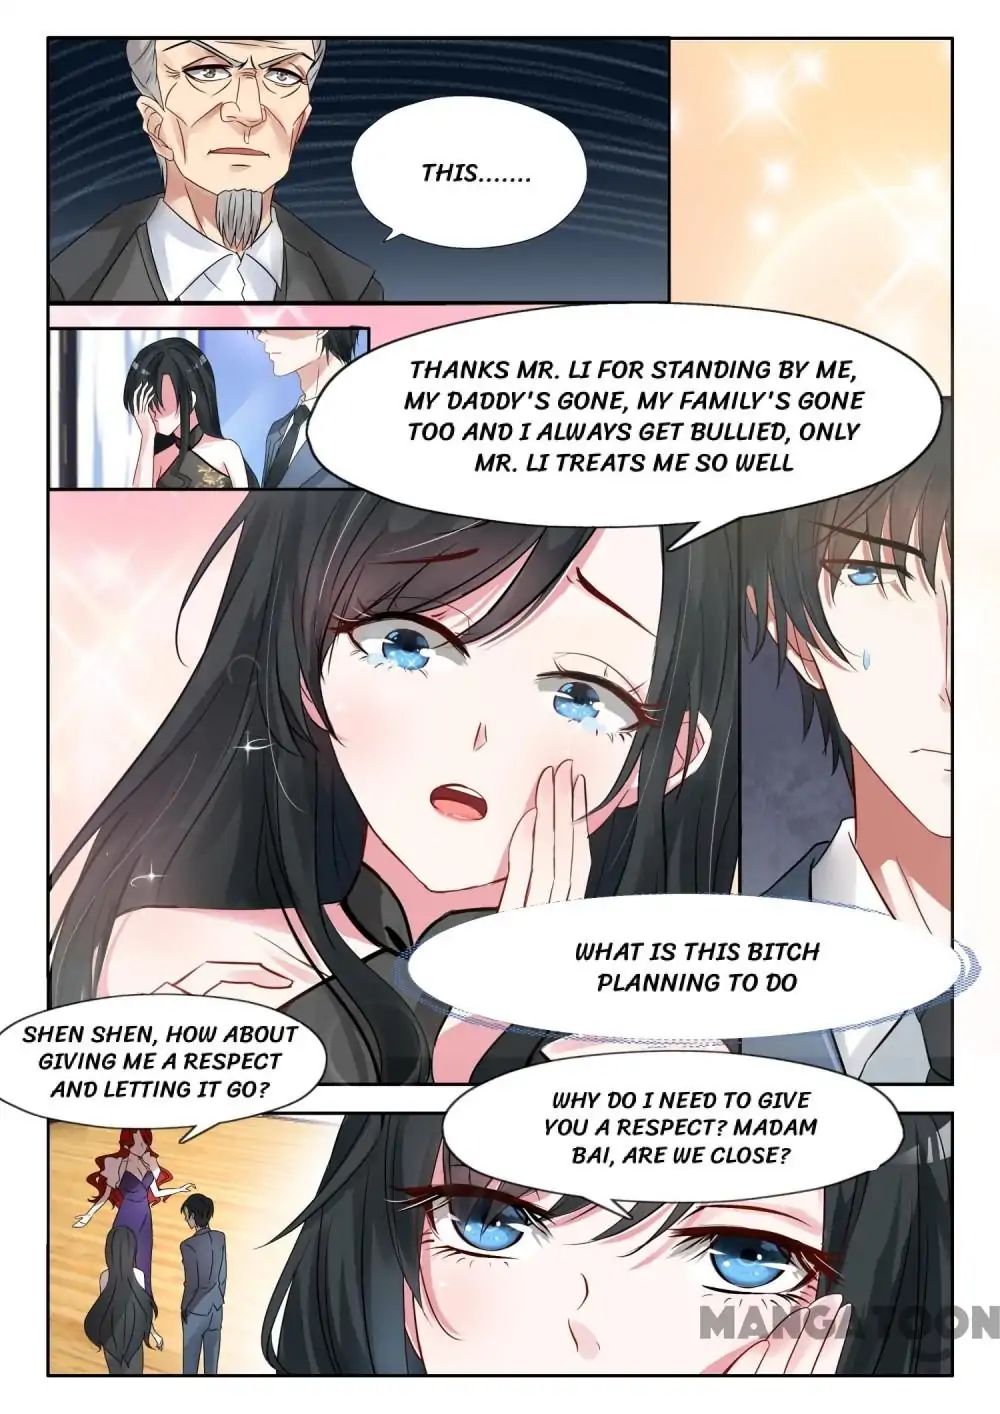 My Adorable Girlfriend - Page 1